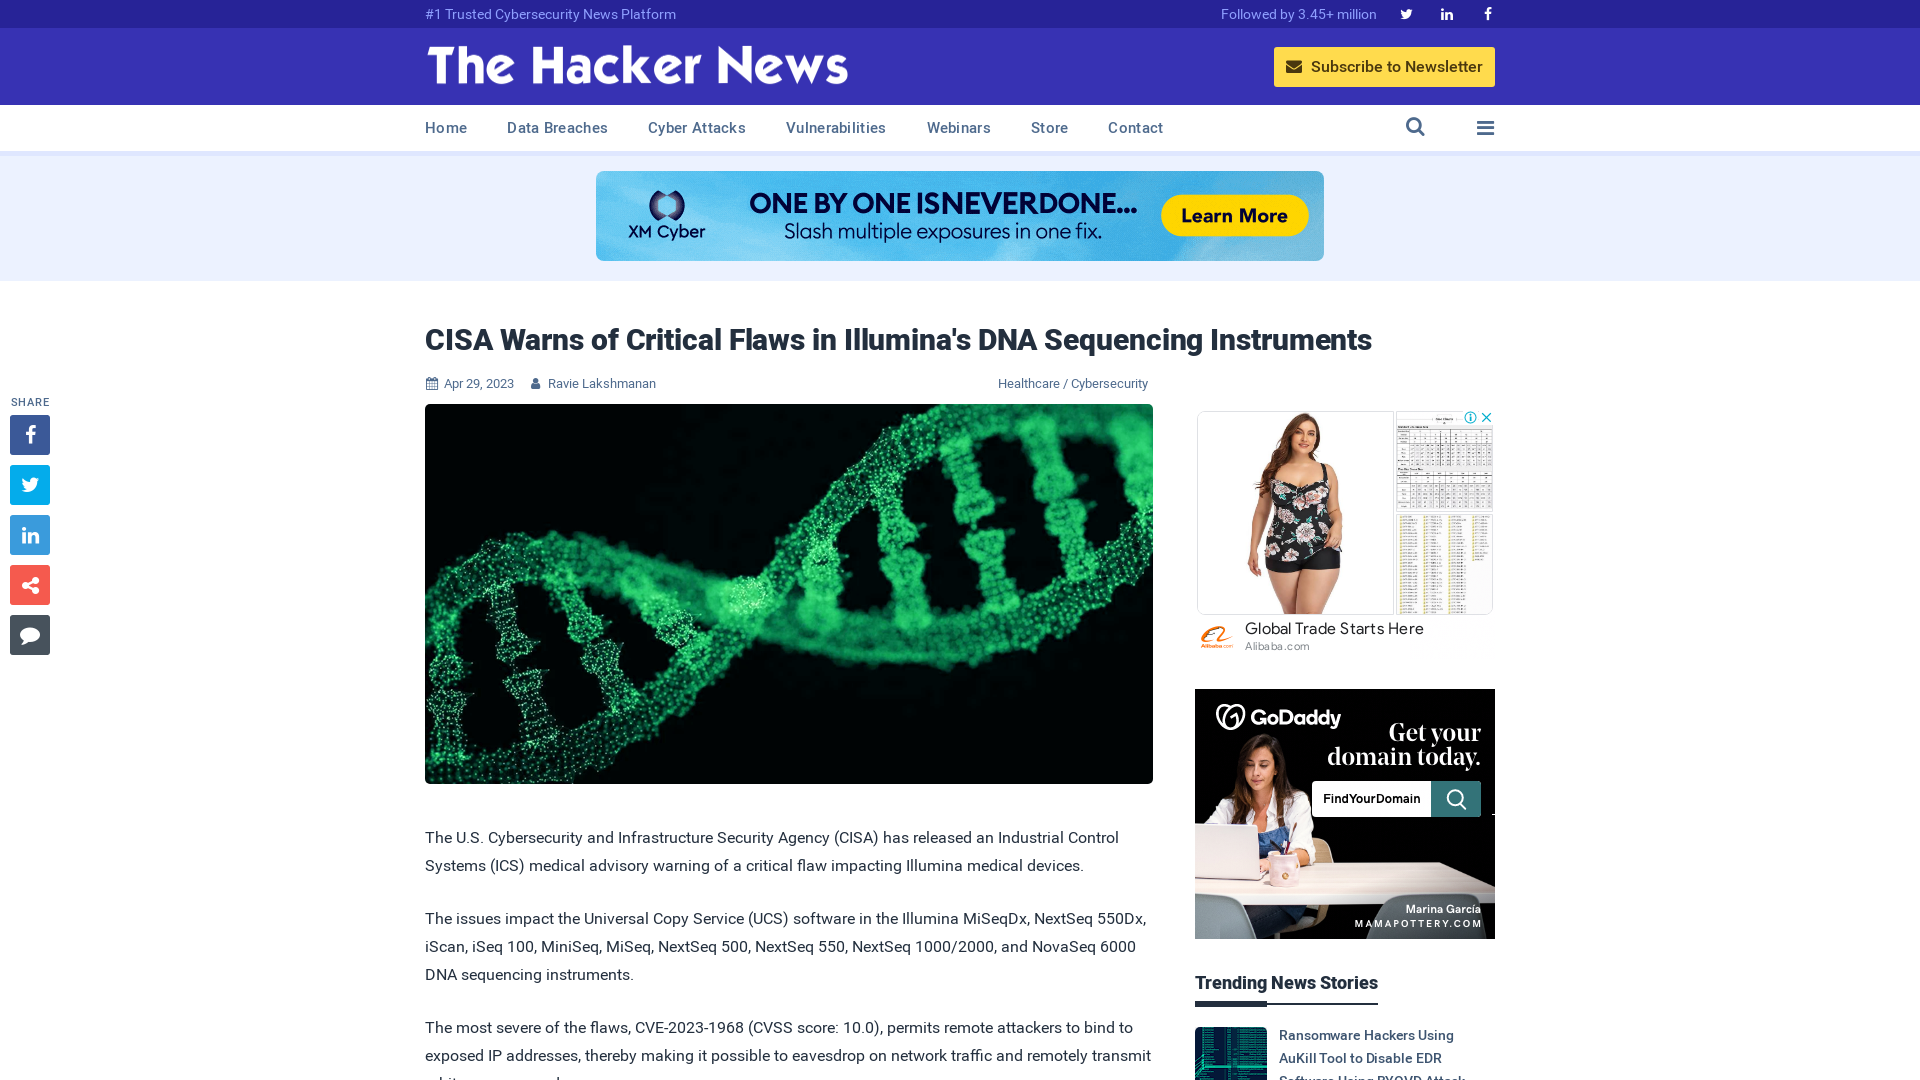 CISA Warns of Critical Flaws in Illumina's DNA Sequencing Instruments